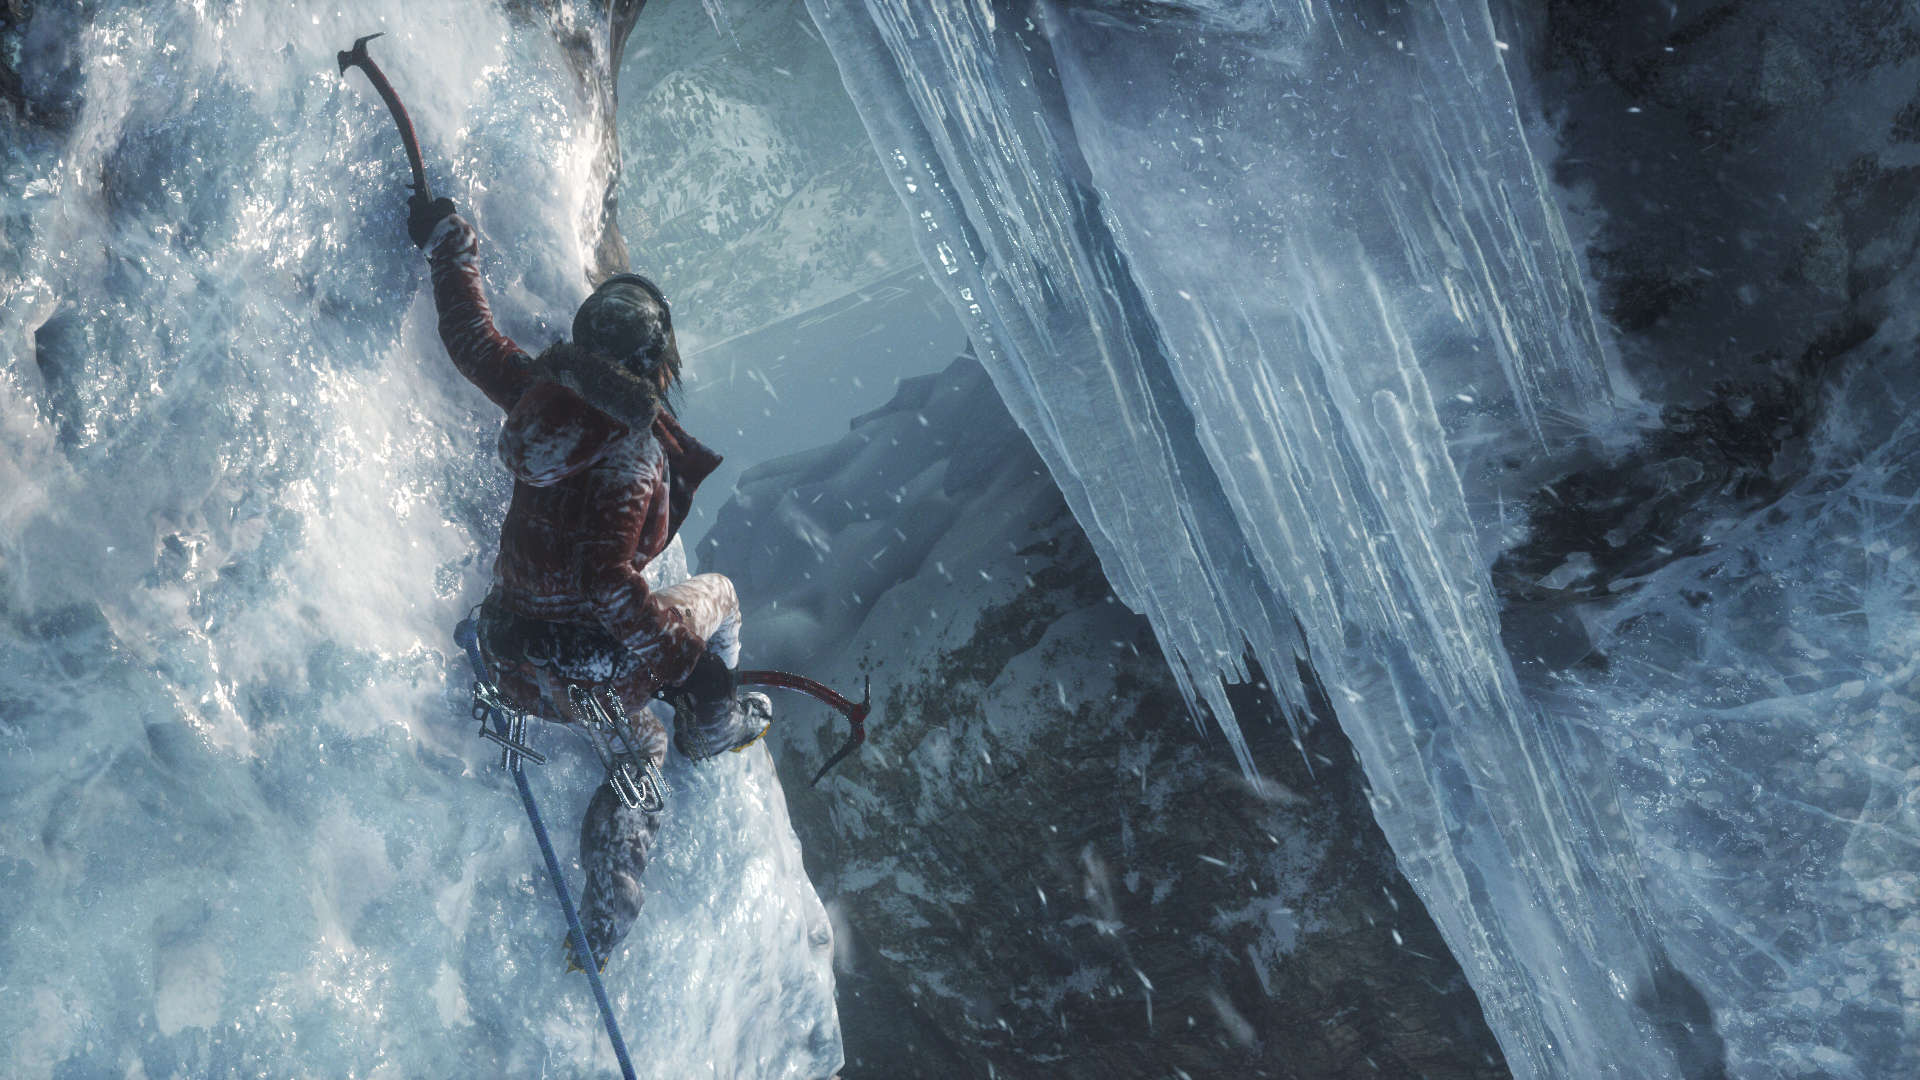 Lara clings to an ice wall with her red pickaxe, preparing to make a big leap.